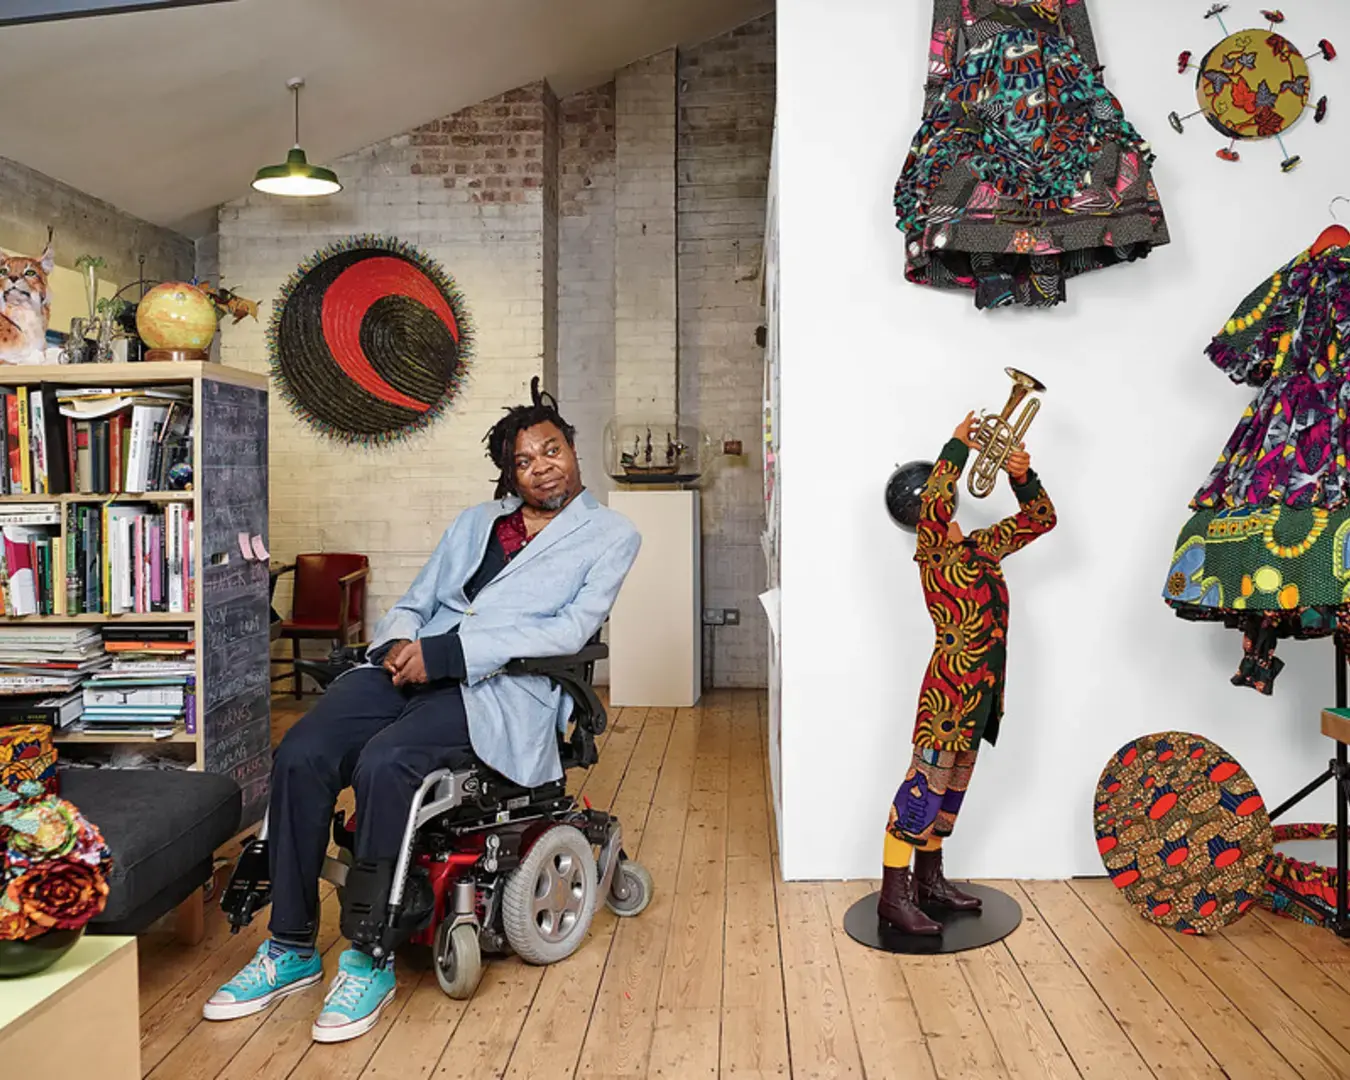 Yinka Shonibare in his London studio, with sculptures featuring his signature batik cloth. Photo by James Mollison for The Wall Street Journal.